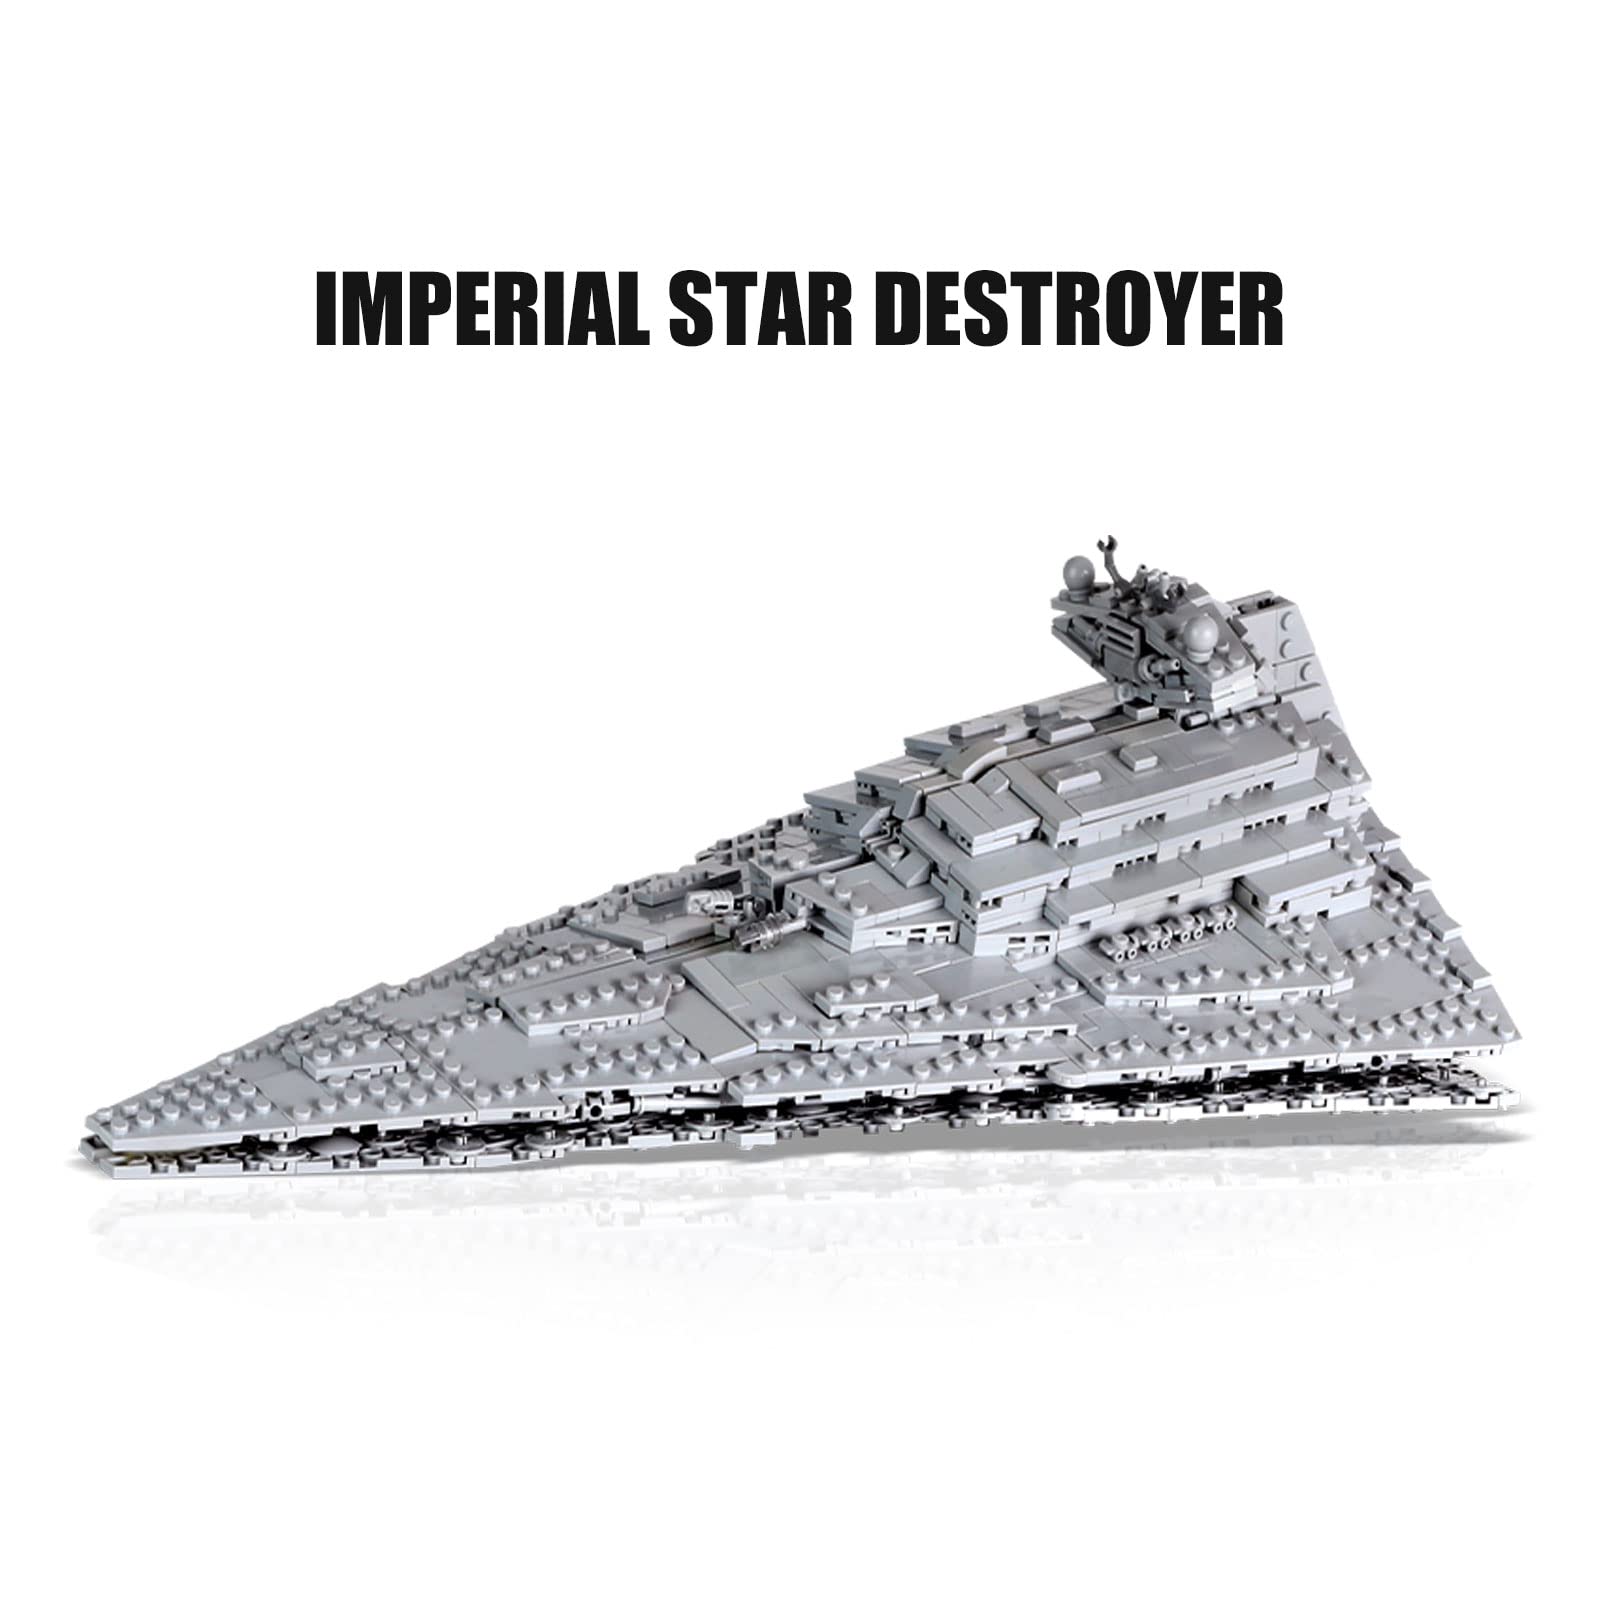 Mould King 21007 Super Star Destroyer Model Kit, 5162+Pcs Spaceship UCS Imperial Building Sets, Awesome Building Toy Gift Ideas for Kids, The Empire Over Jedha City